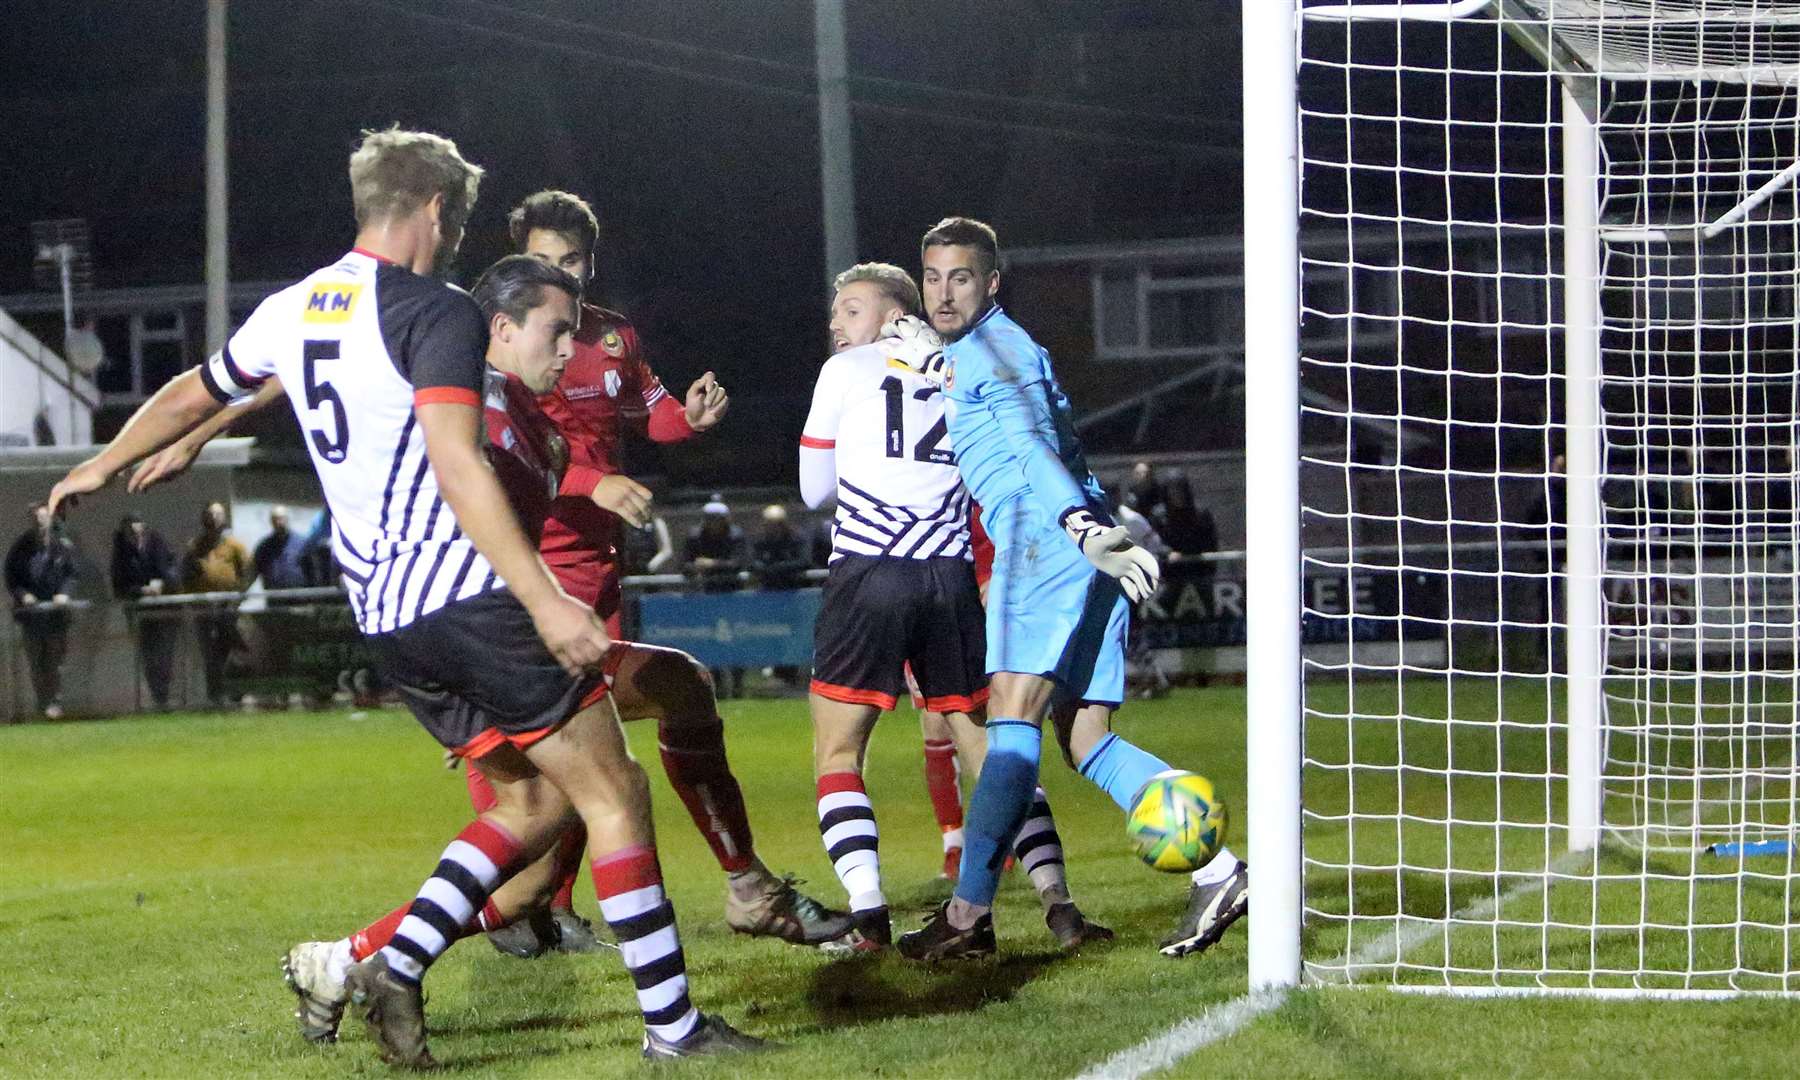 Deal Town captain Kane Smith equalises against Whitstable Town. Picture: Paul Willmott